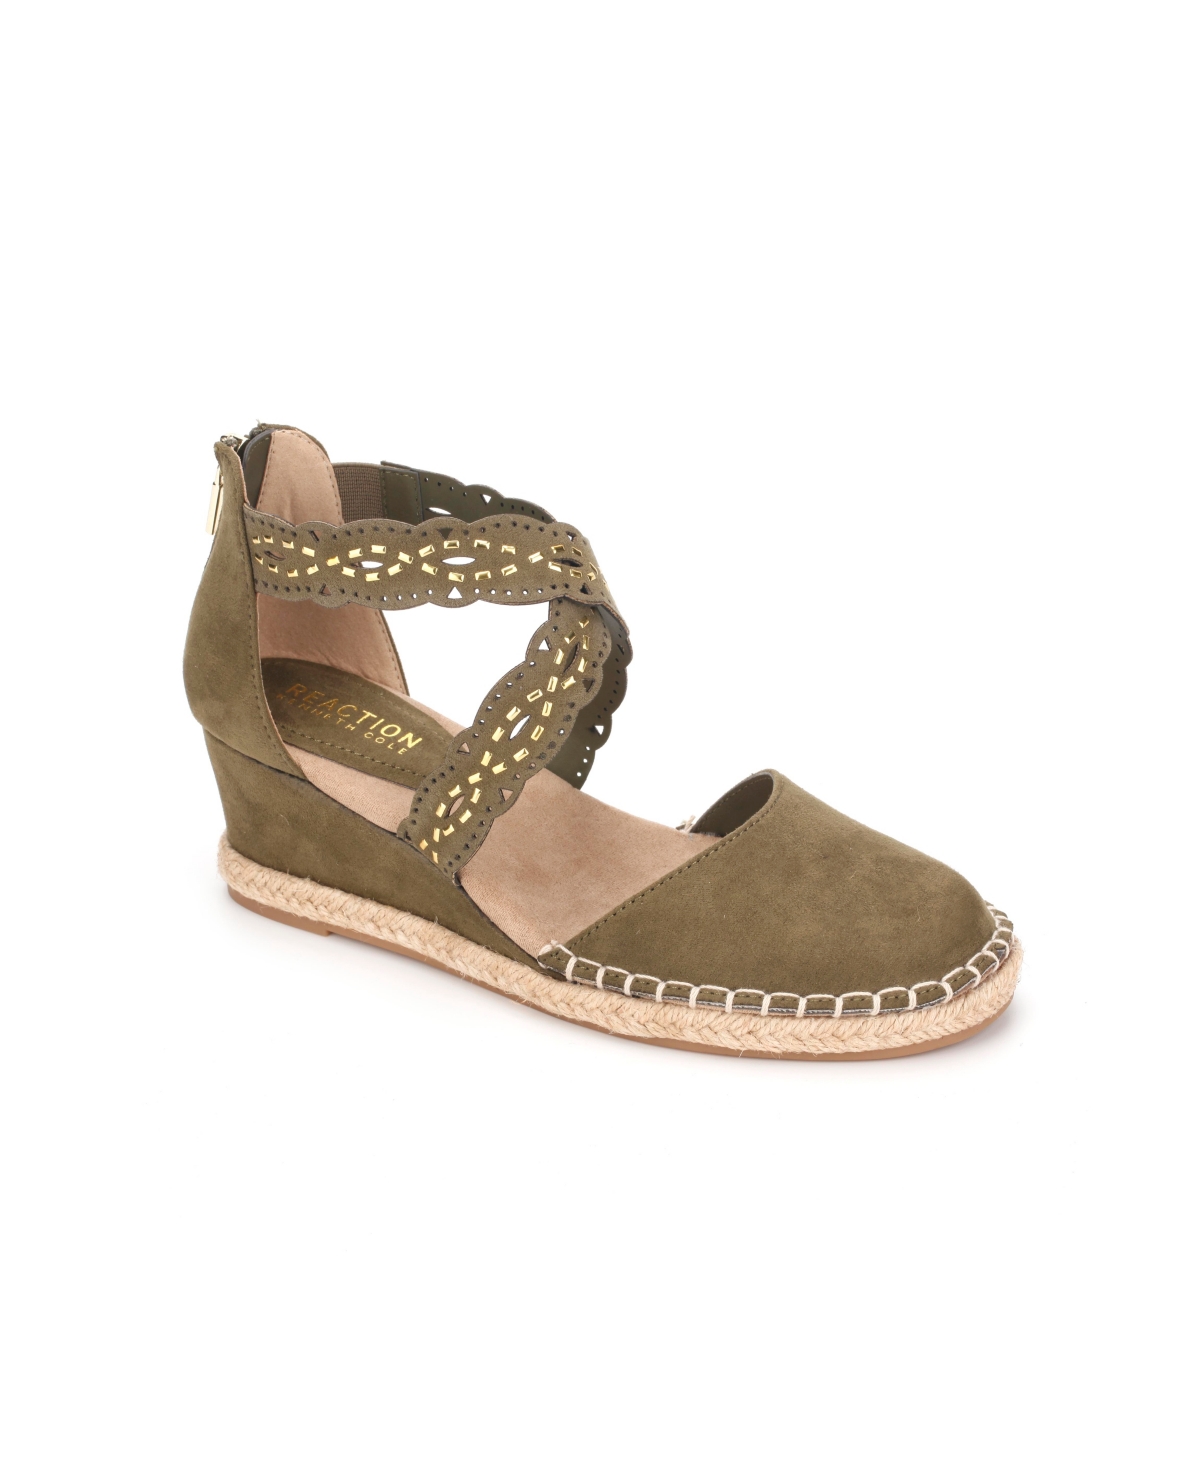 Women's Clo X Band Laser Strappy Espadrille Wedge Sandals - Olive